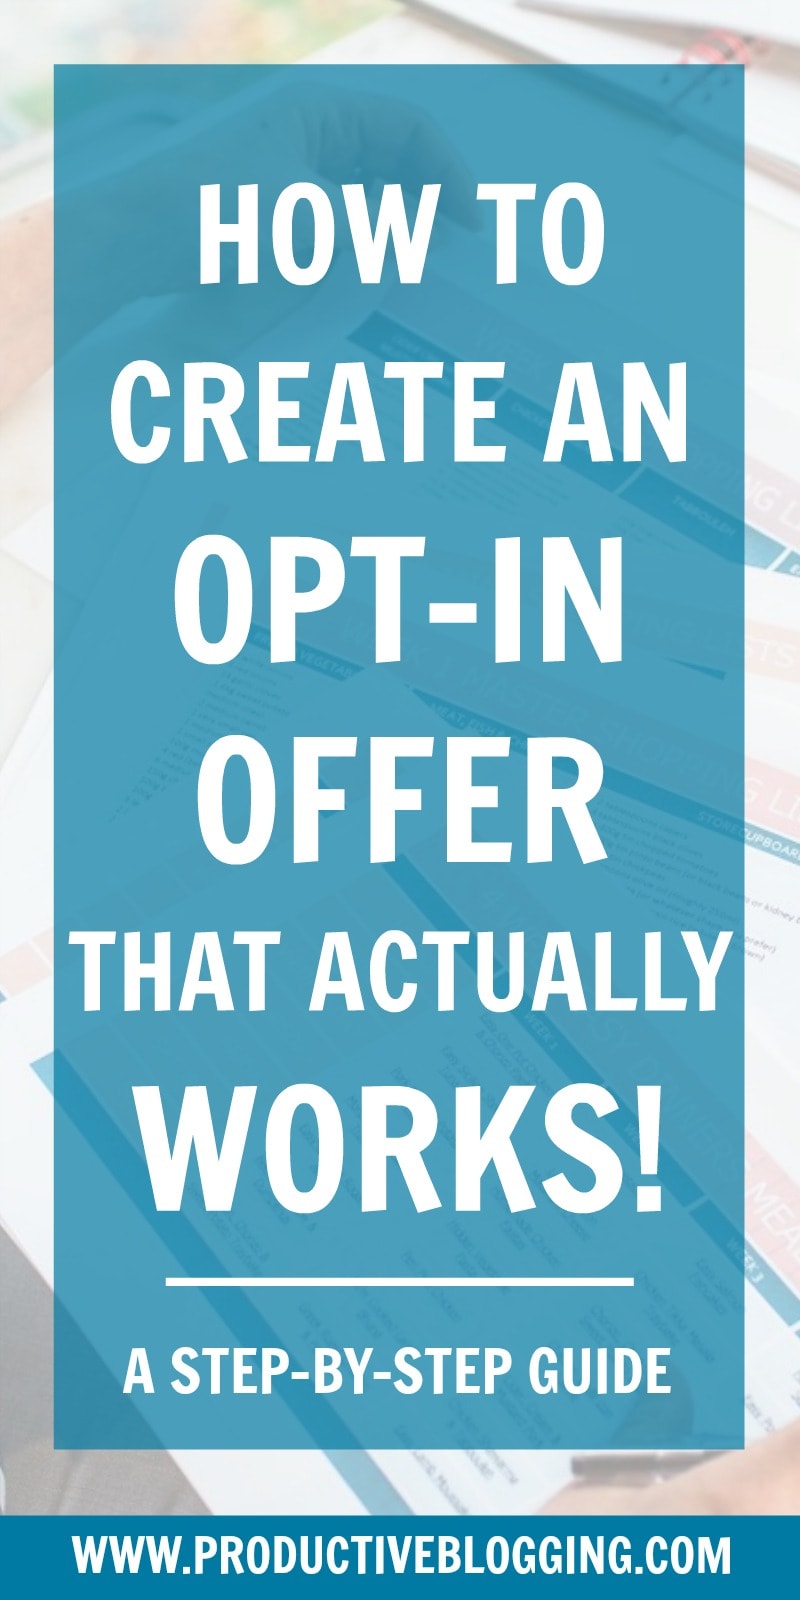 Want to create an irresistible opt-in offer that will grow your email list and your blogging profits? Convinced by the theory, but want a practical step-by-step guide as to how to actually make one? Here’s my step-by-step guide to creating an opt-in offer… #optin #optinoffer #contentupgrade #leadmagnet #emailmarketing #growyouremaillist #emaillist #subscribers #themoneyisinthelist #convertkit #bloggingtips #blogging #bloggers #solopreneur #productivitytips #productivity #productiveblogging